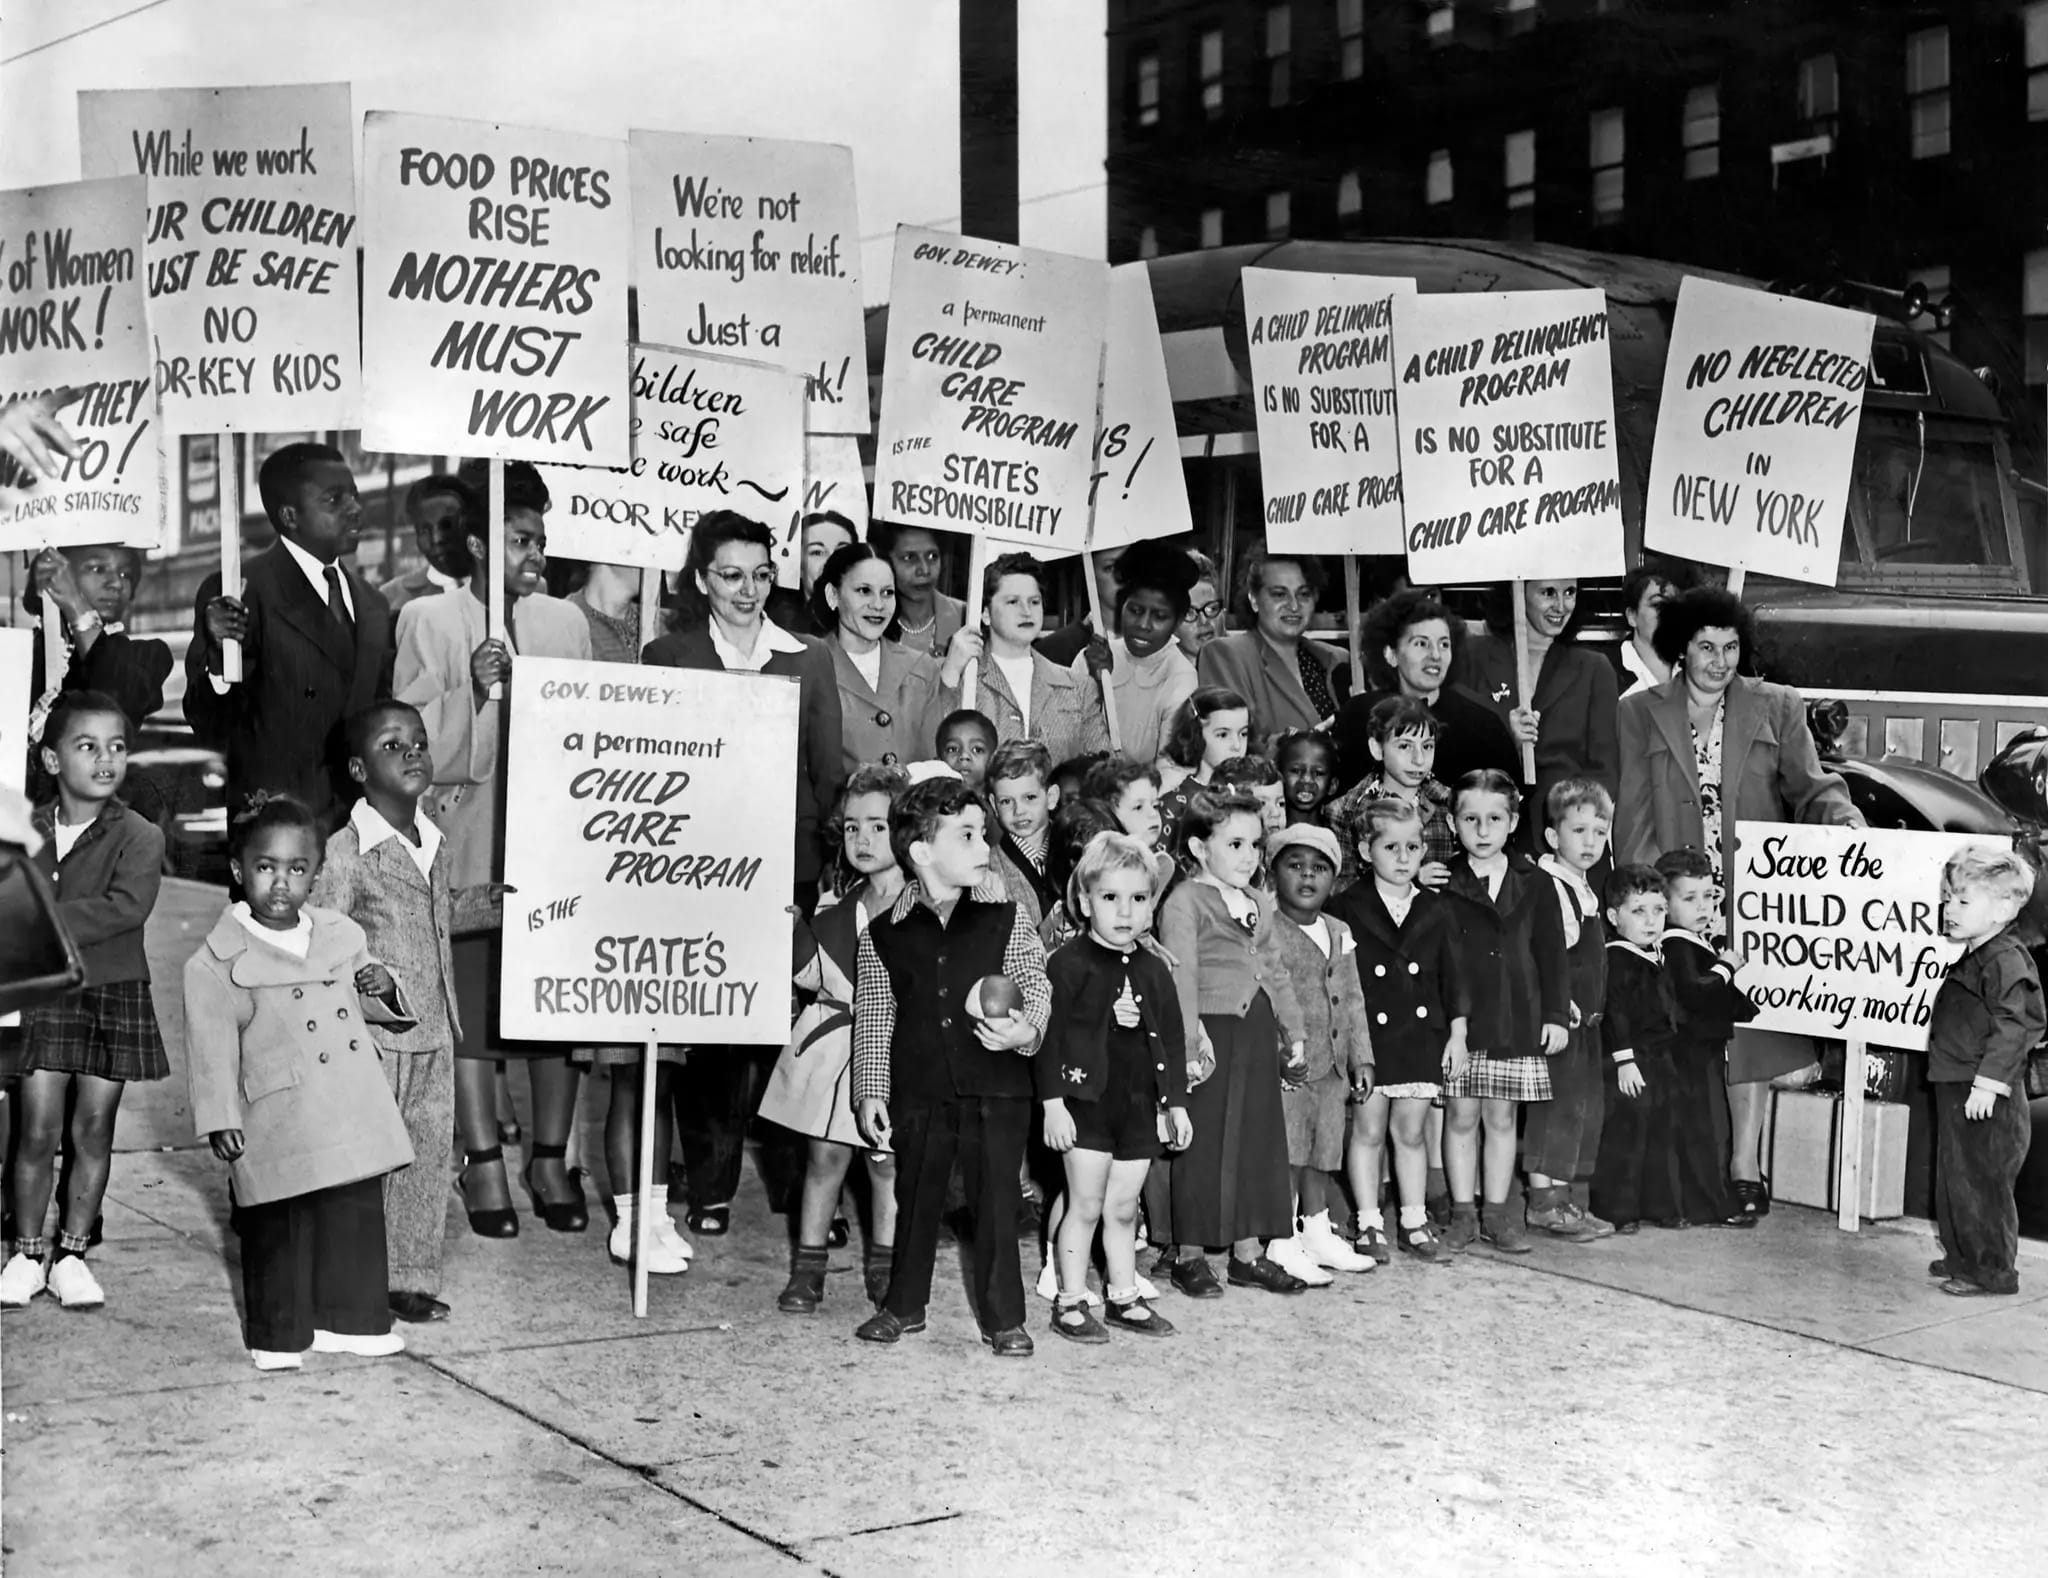 1947 After WWII, Parents Organized Demonstrations (NYT)